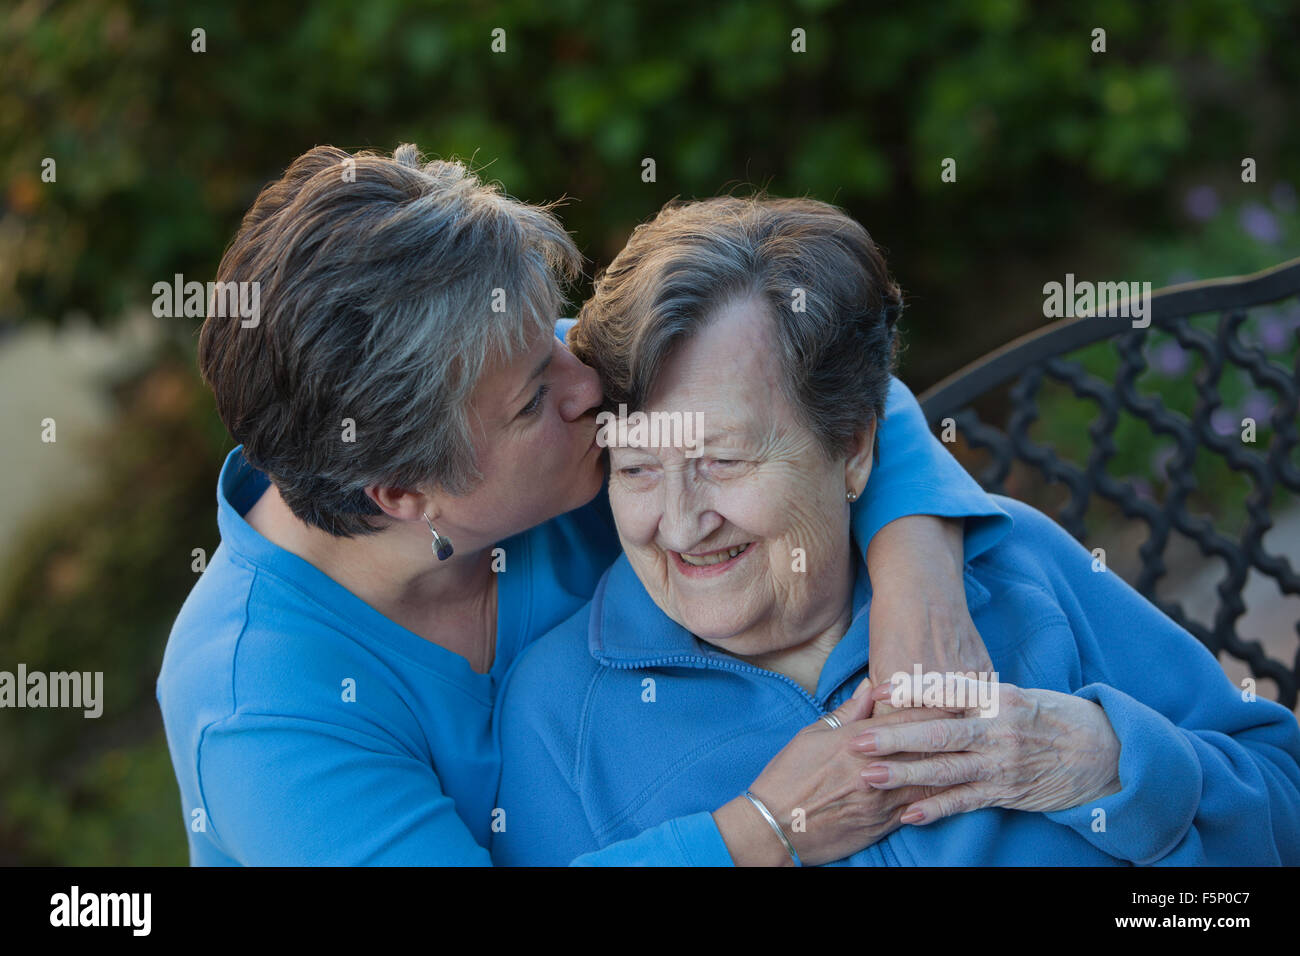 Daughter Kisses Mothers Forehead tenderly. Stock Photo